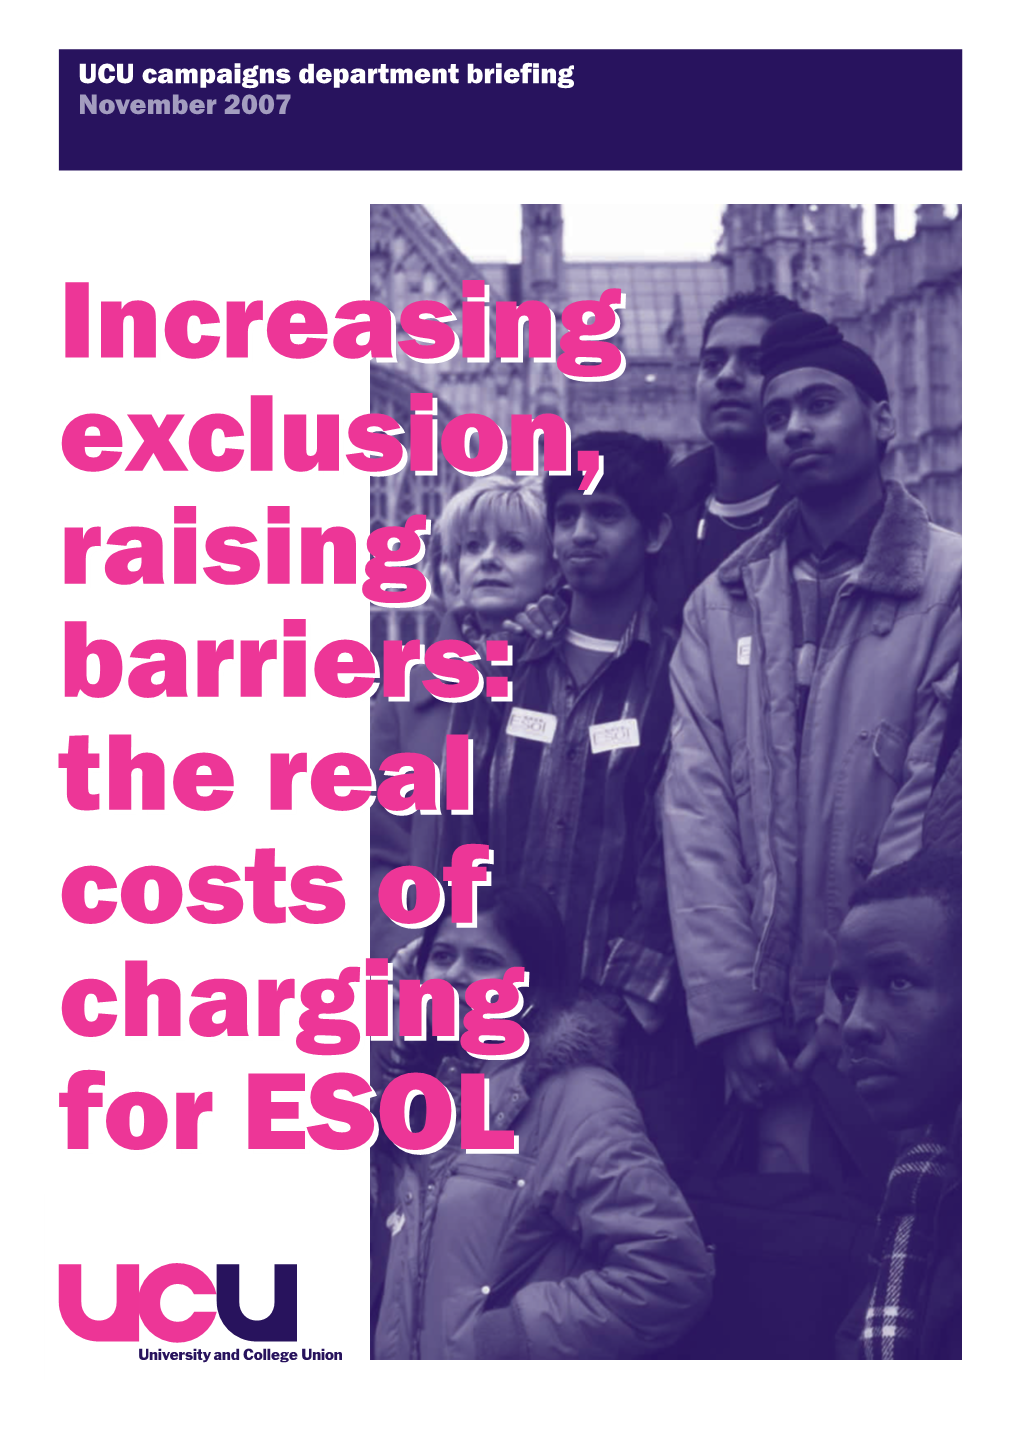 The Real Costs of Charging for ESOL Increasing Exclusion, Raising